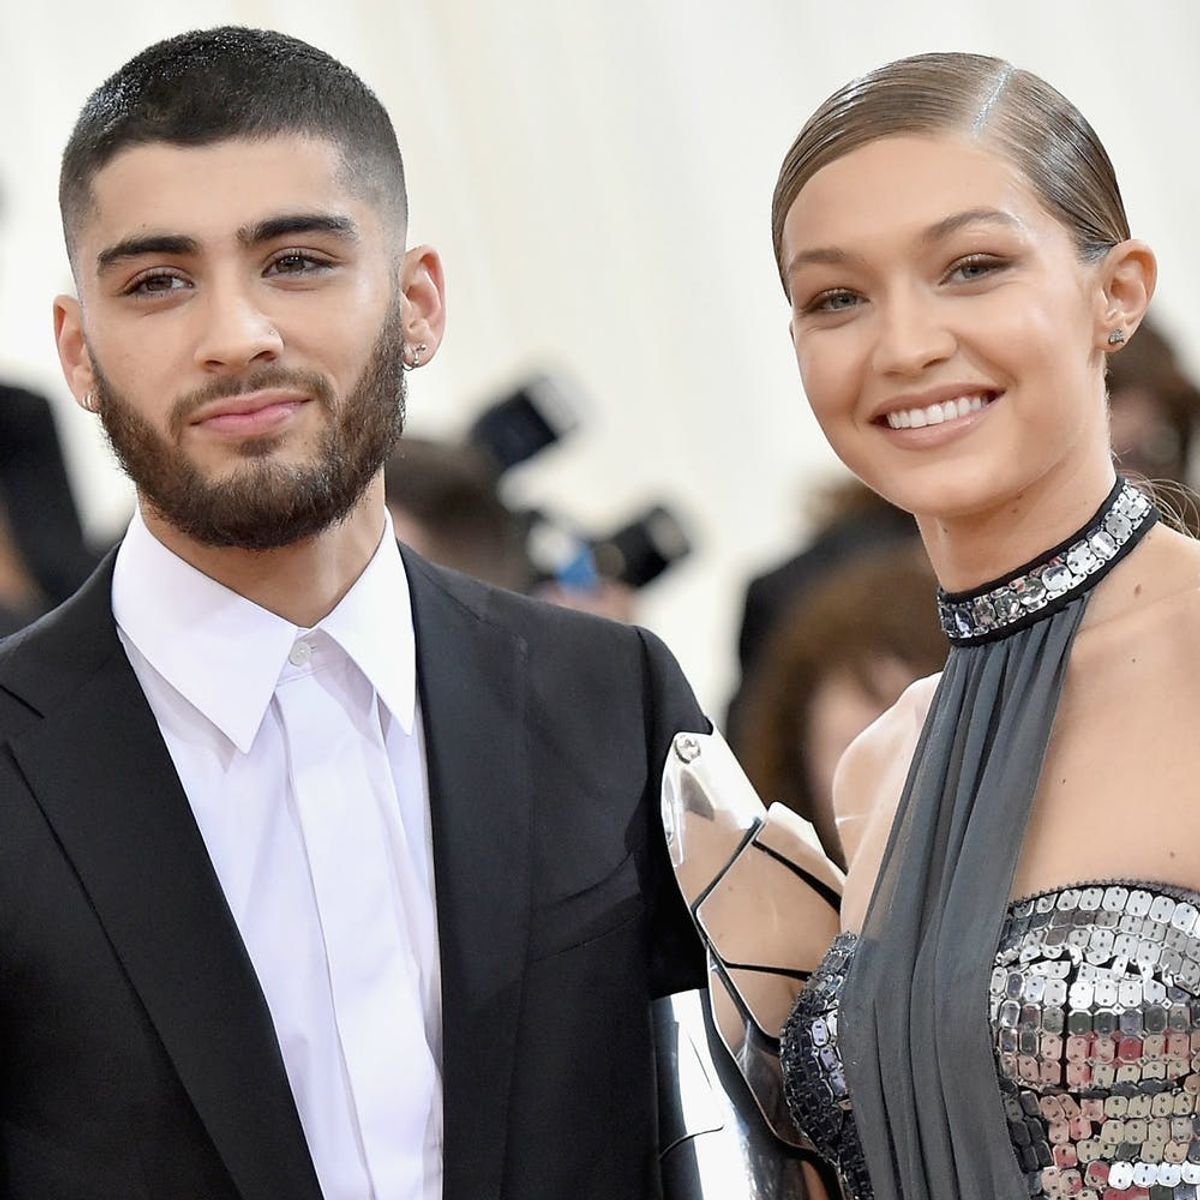 Here’s the Photographic Proof That Gigi and Zayn Are Still Together